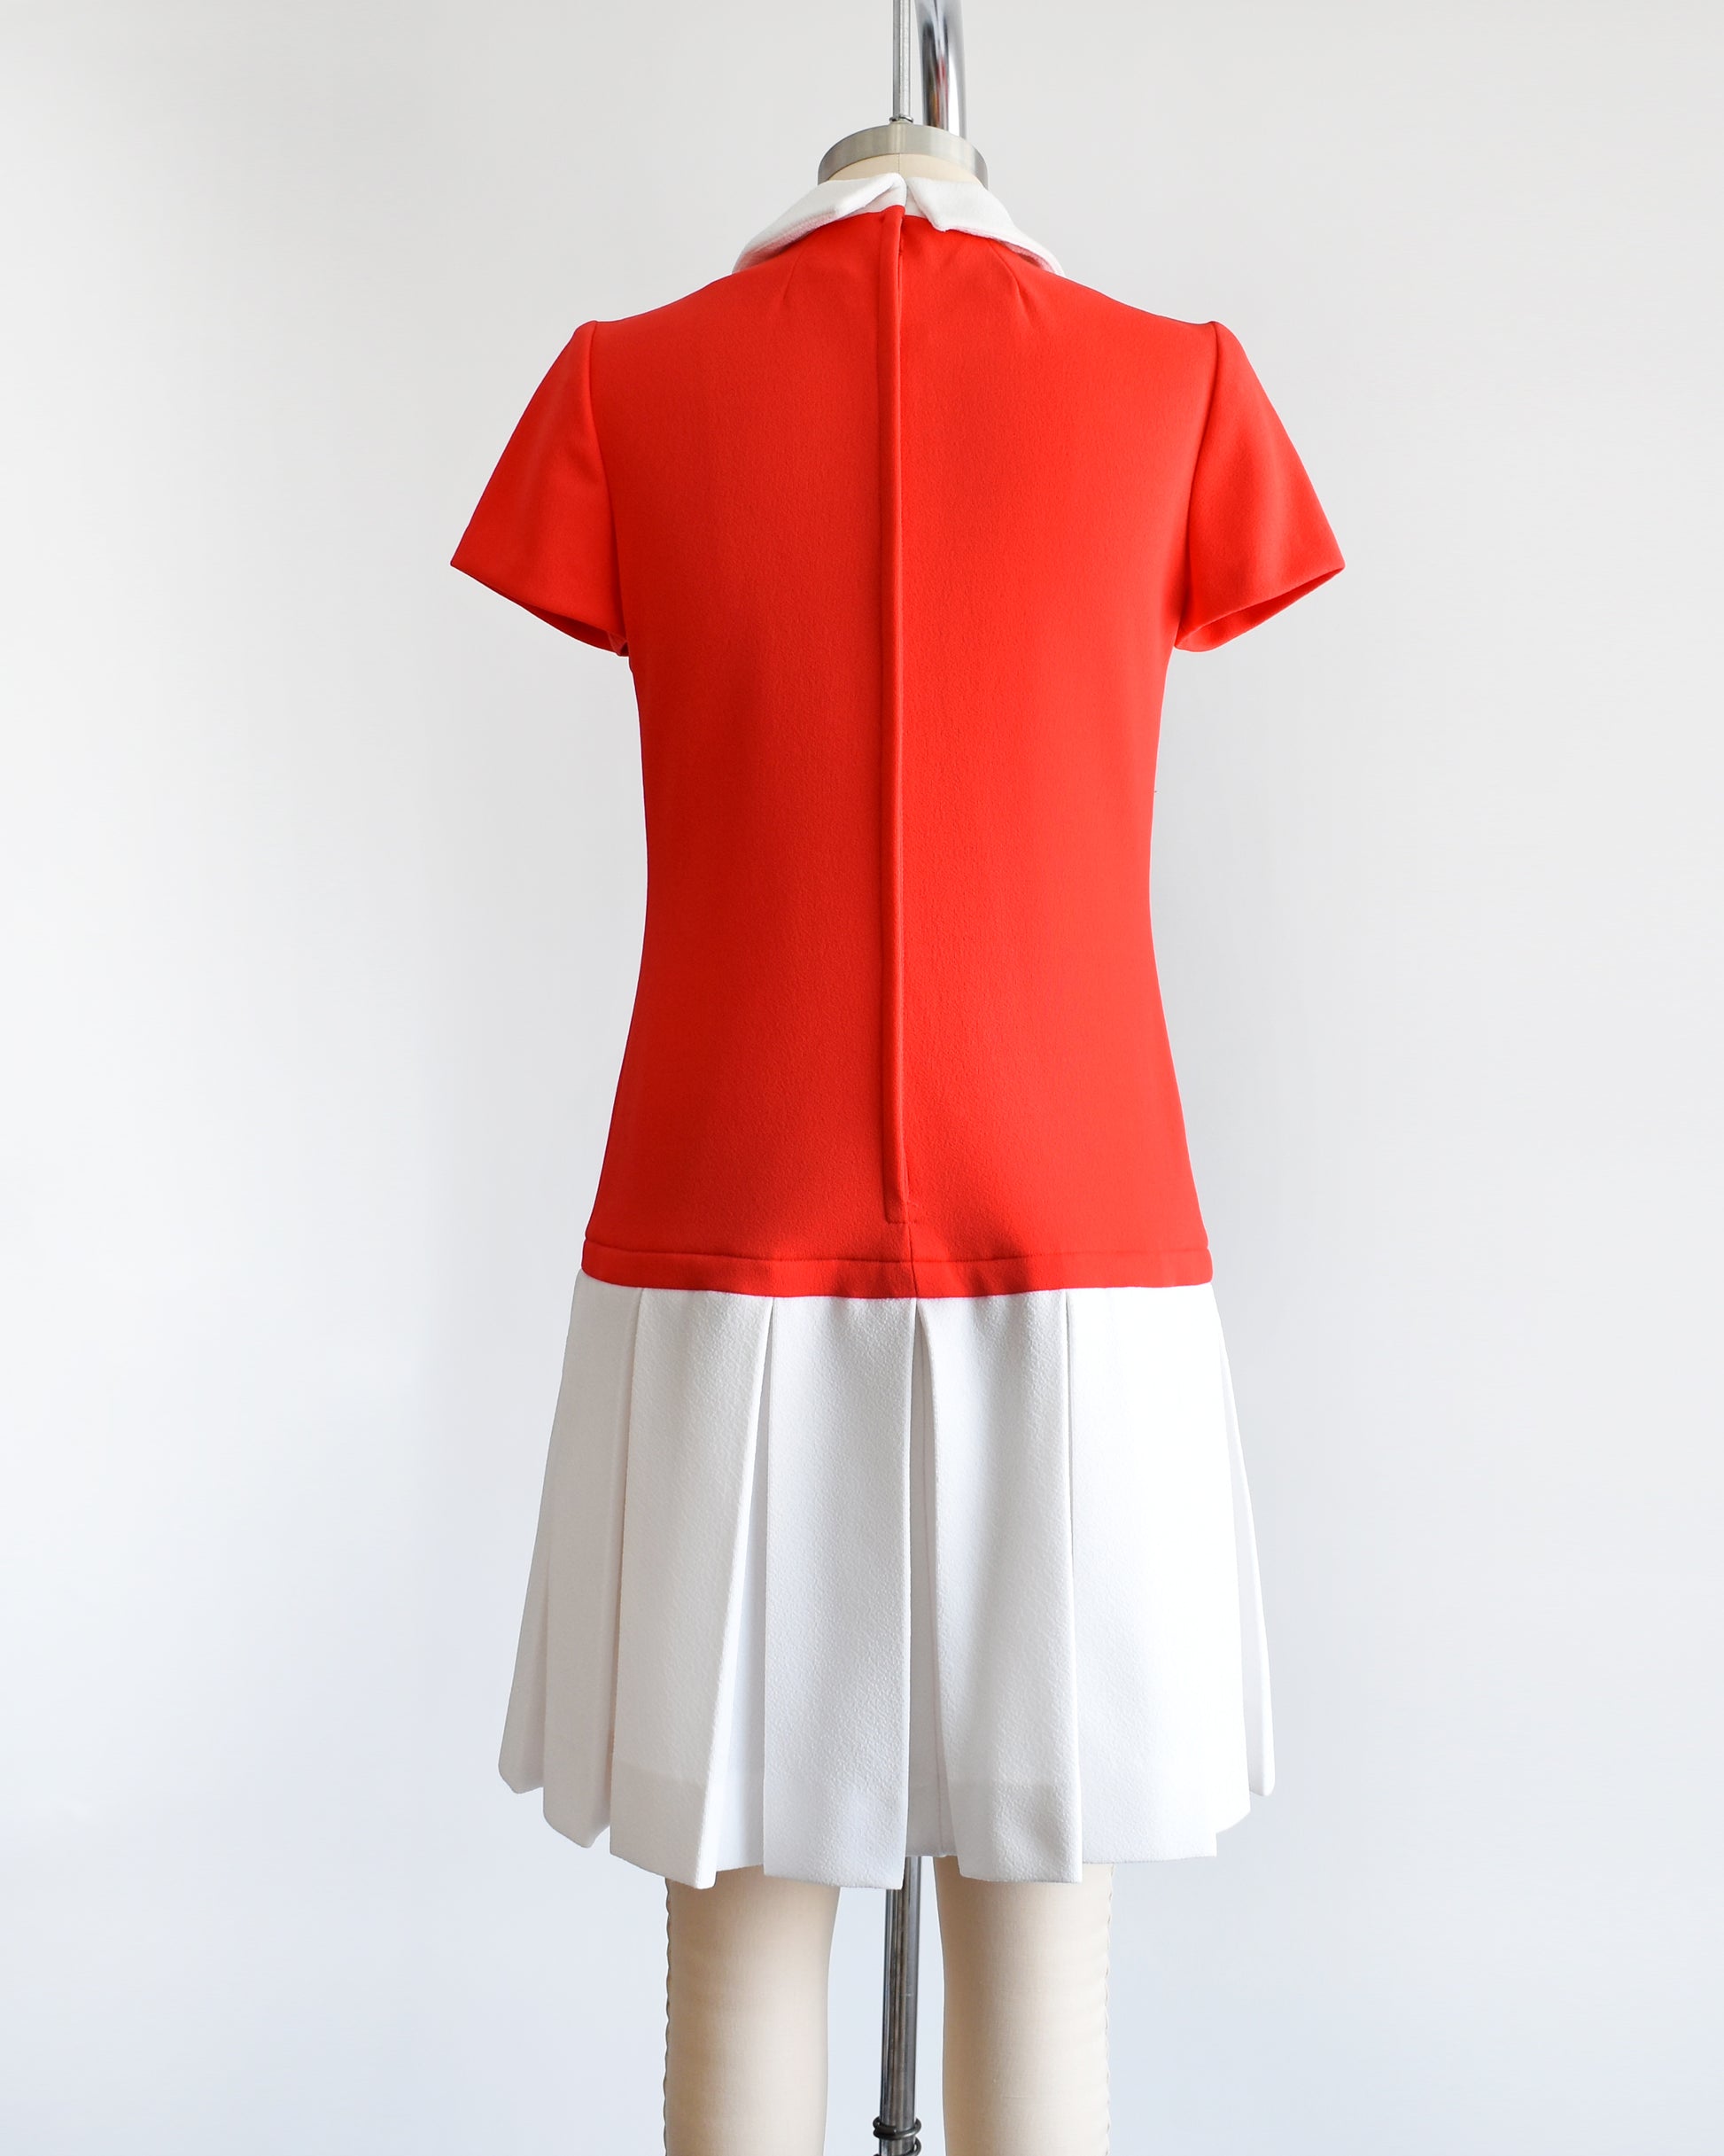 Back view of  a vintage late 1960s early 1970s drop waist dress features a red bodice and white pleated skirt. Zipper up the back